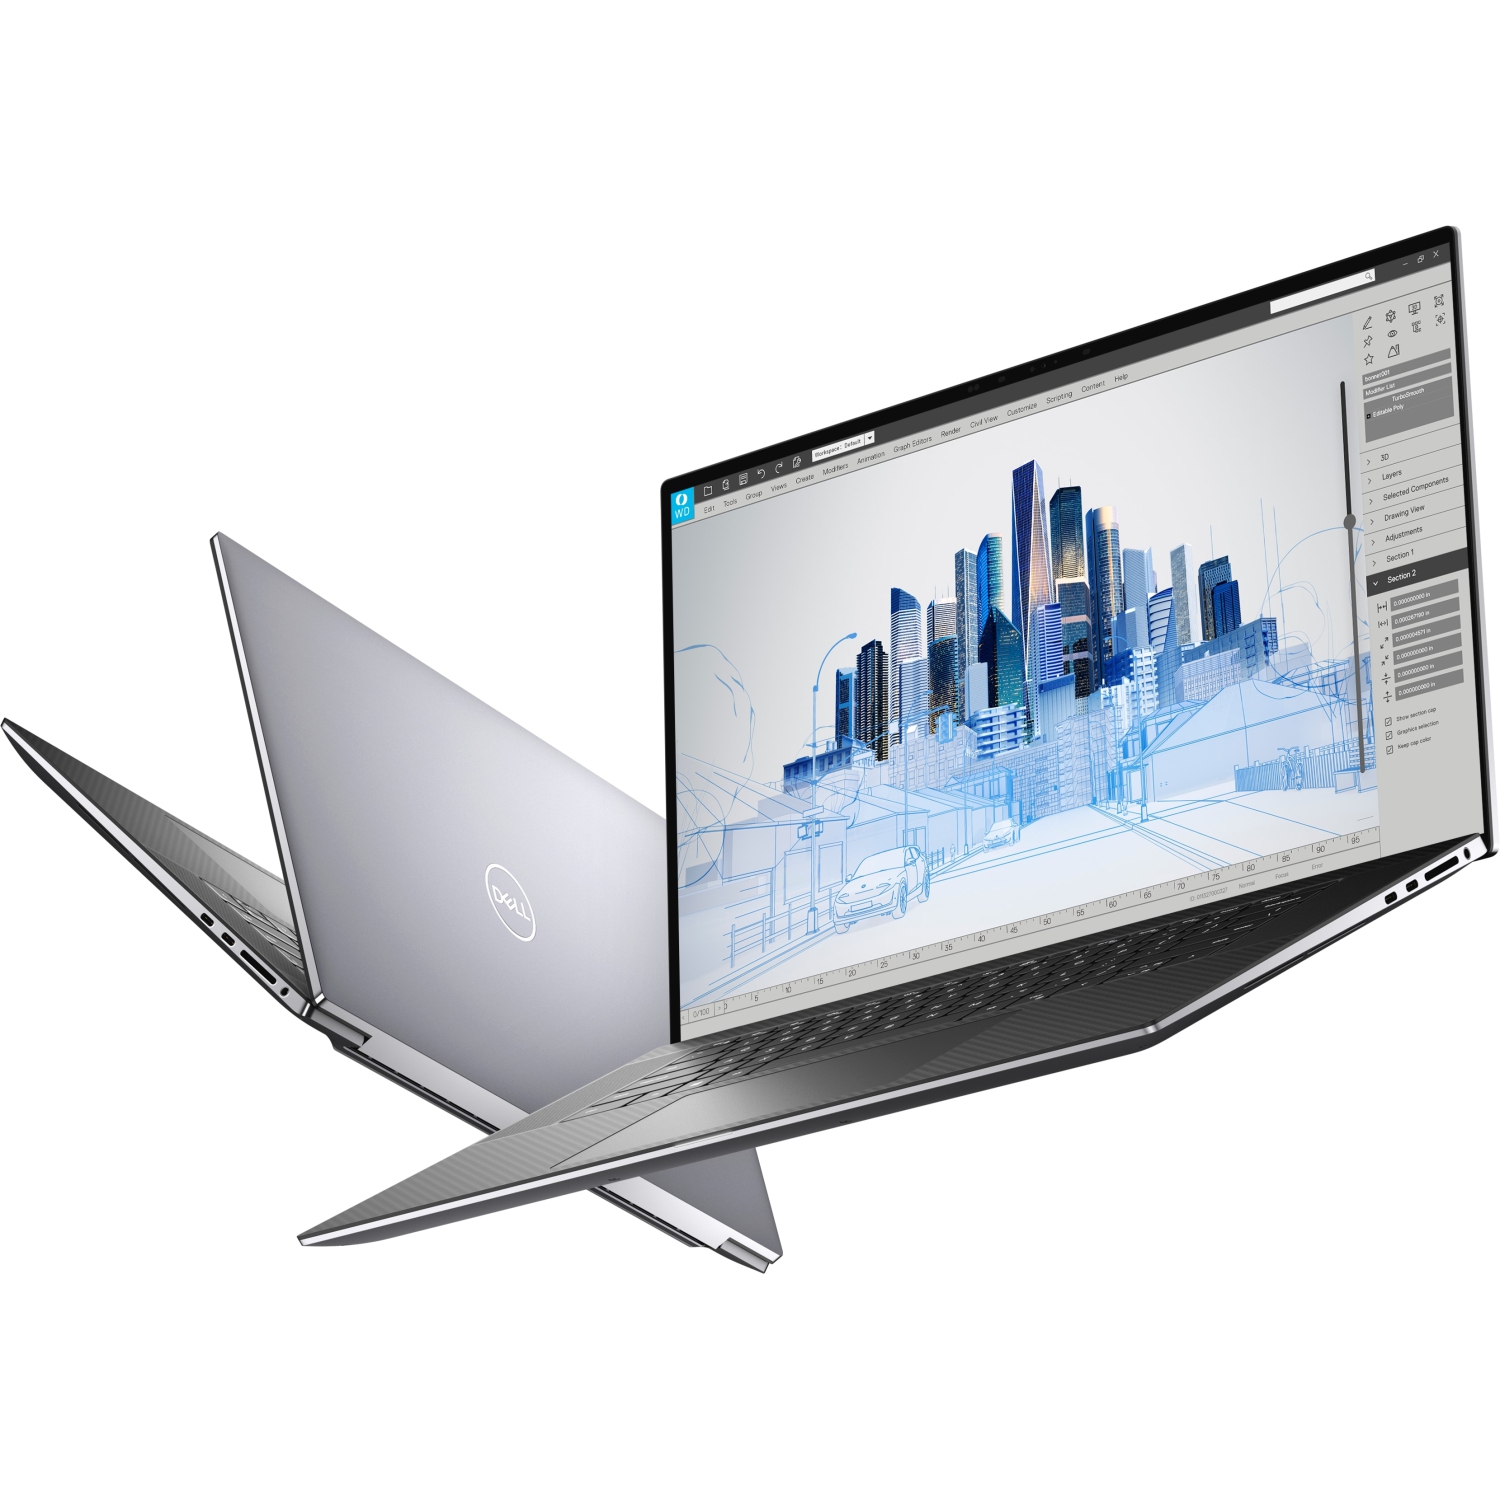 Refurbished (Excellent) - Dell Precision 5000 5760 Workstation Laptop (2021), 17" 4K Touch, Core i7 - 512GB SSD - 32GB RAM - RTX A2000, 4.8 GHz - 11th Gen CPU Certified